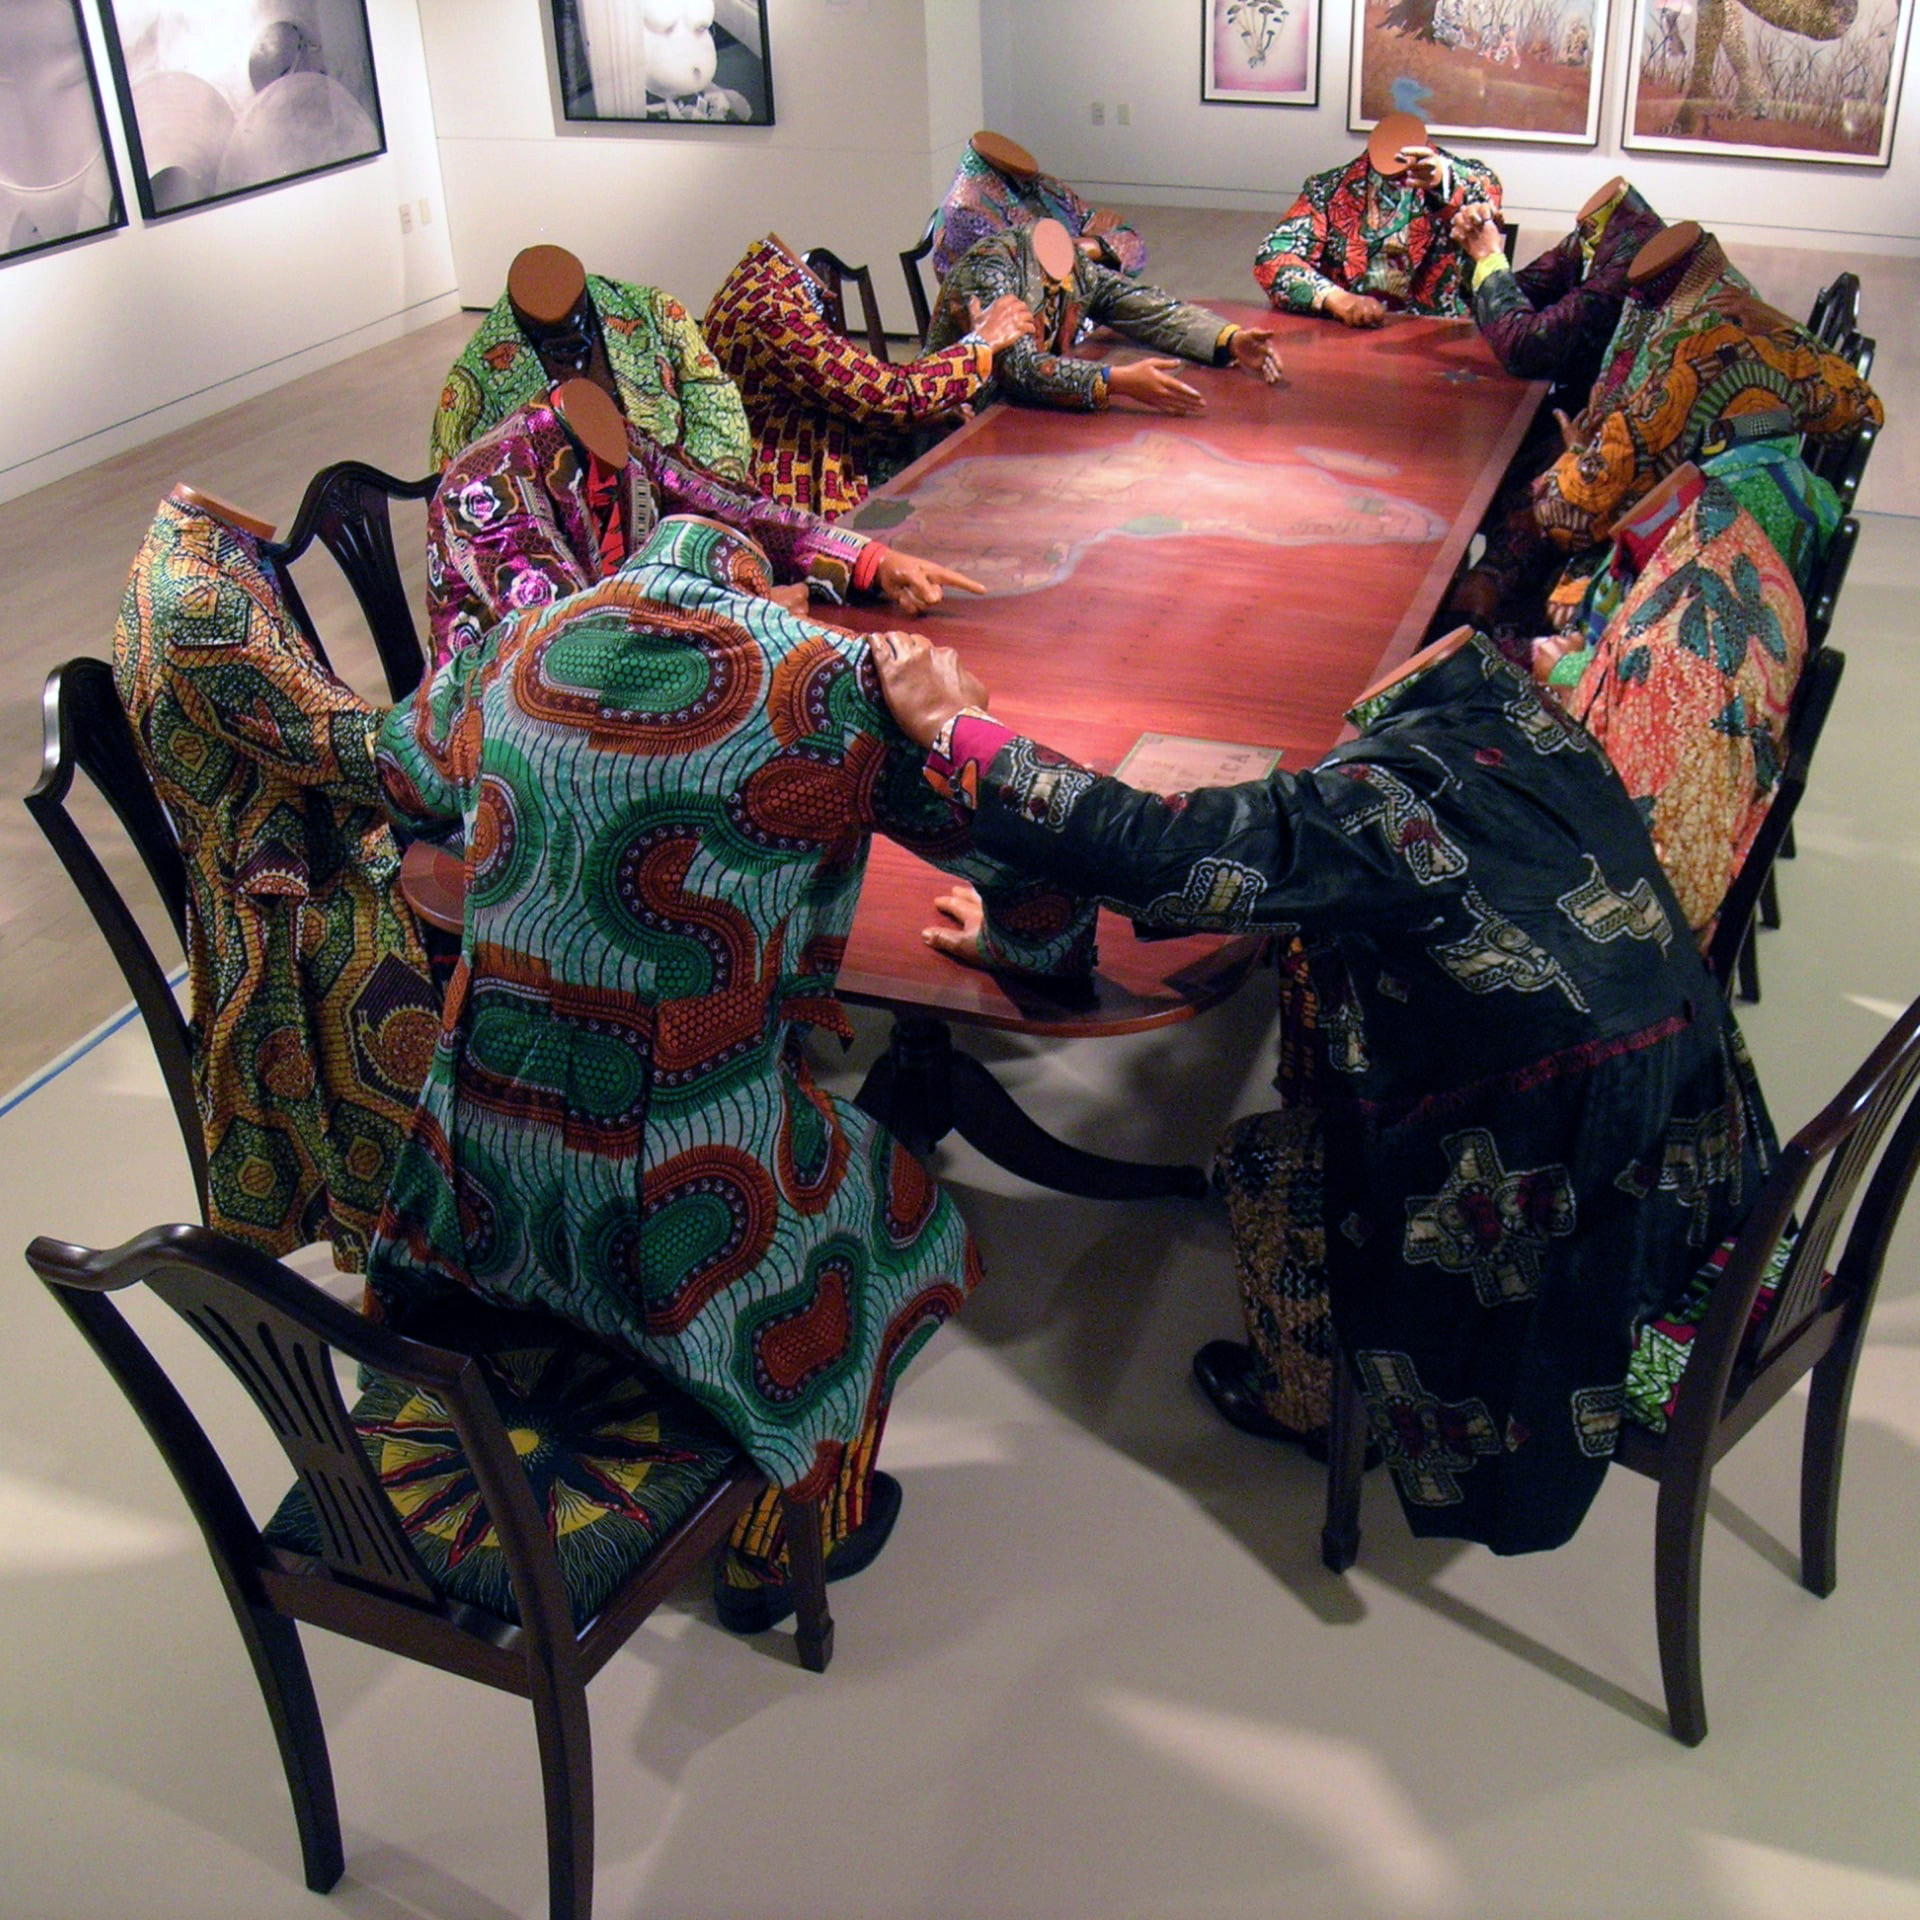 Yinka Shonibare MBE, Scramble for Africa, 2003, 14 life-size fiberglass mannequins, 14 chairs, table, Dutch wax printed cotton (The Pinnell Collection, Dallas)